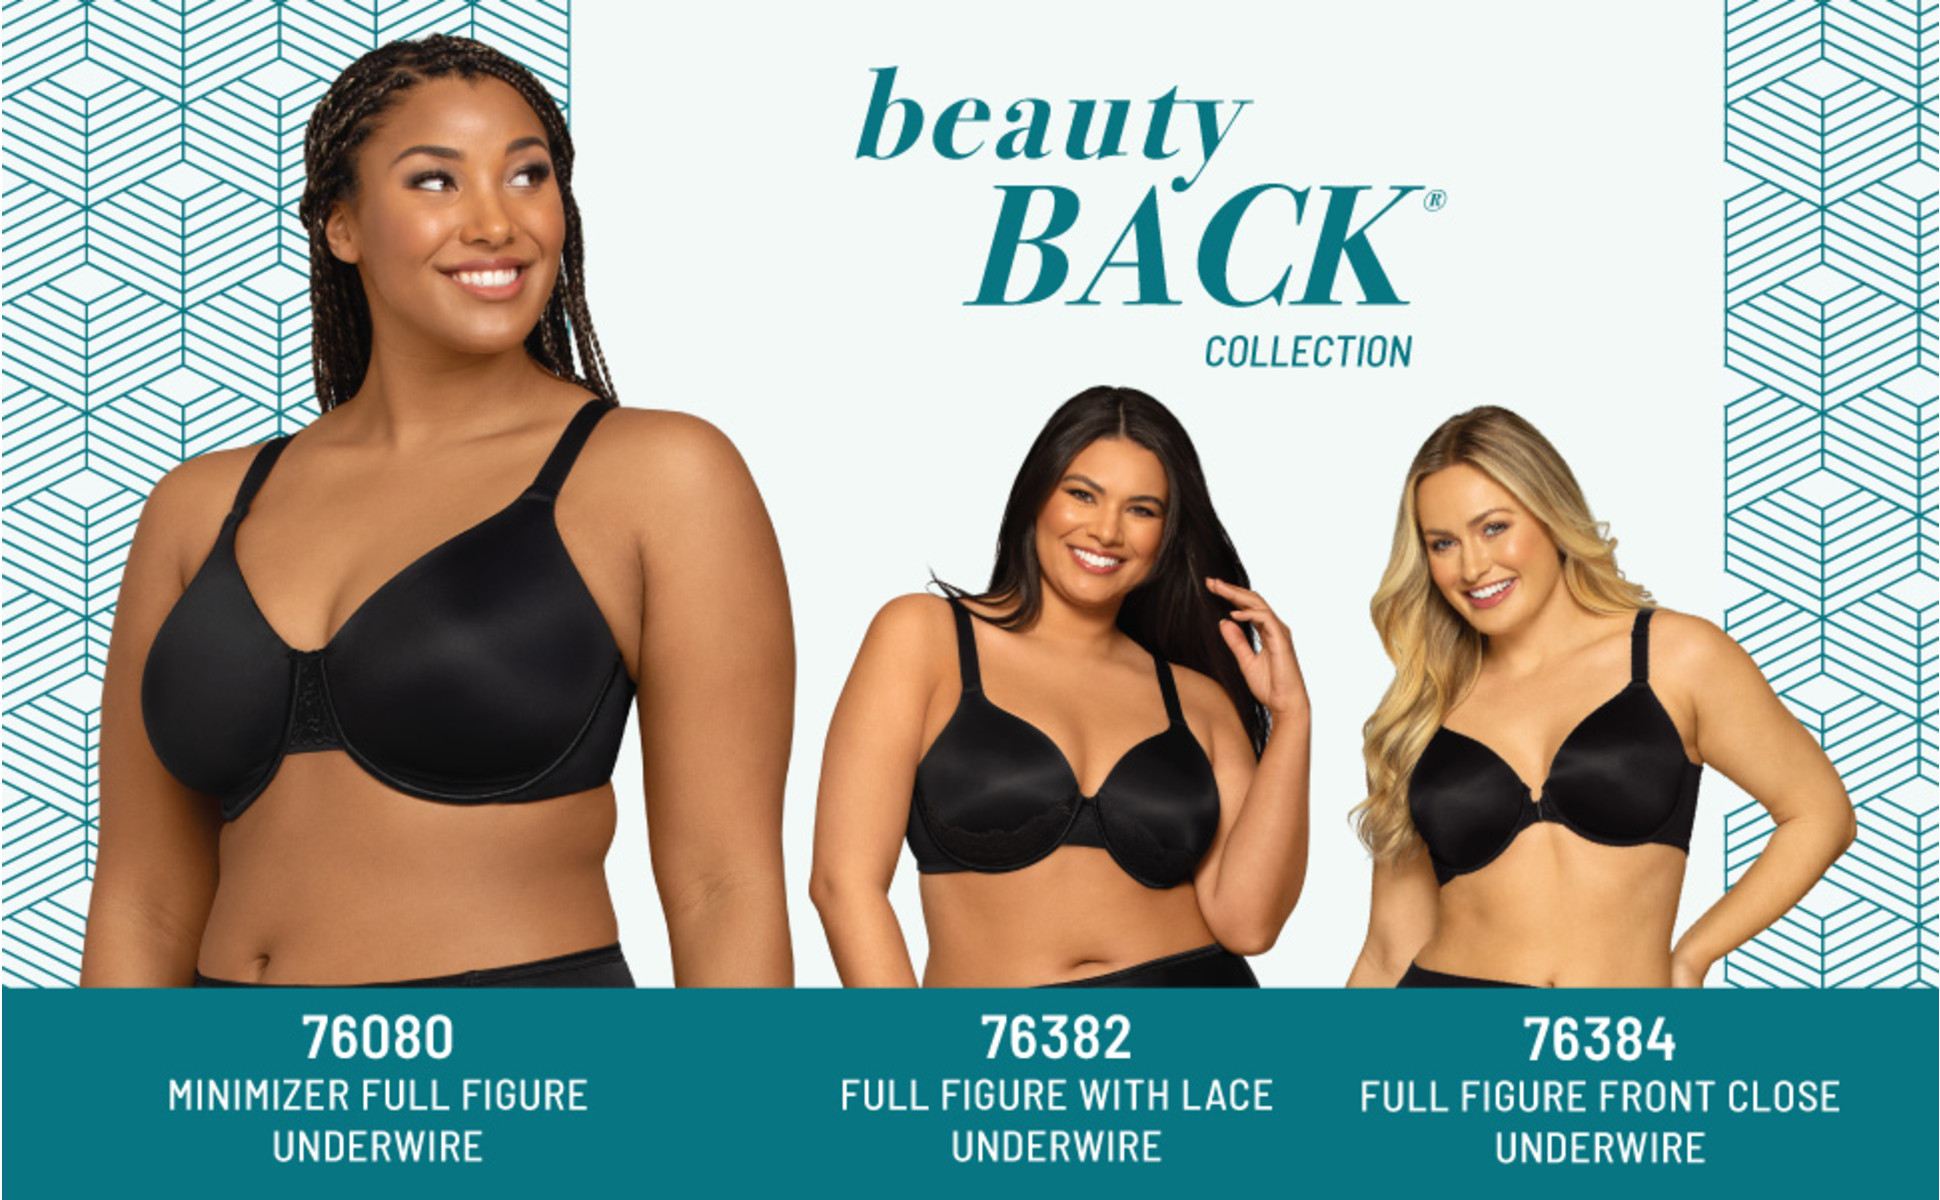 Vanity Fair Womens Beauty Back Full Figure Front Close Underwire 76384 -  MIDNIGHT BLACK - 40D